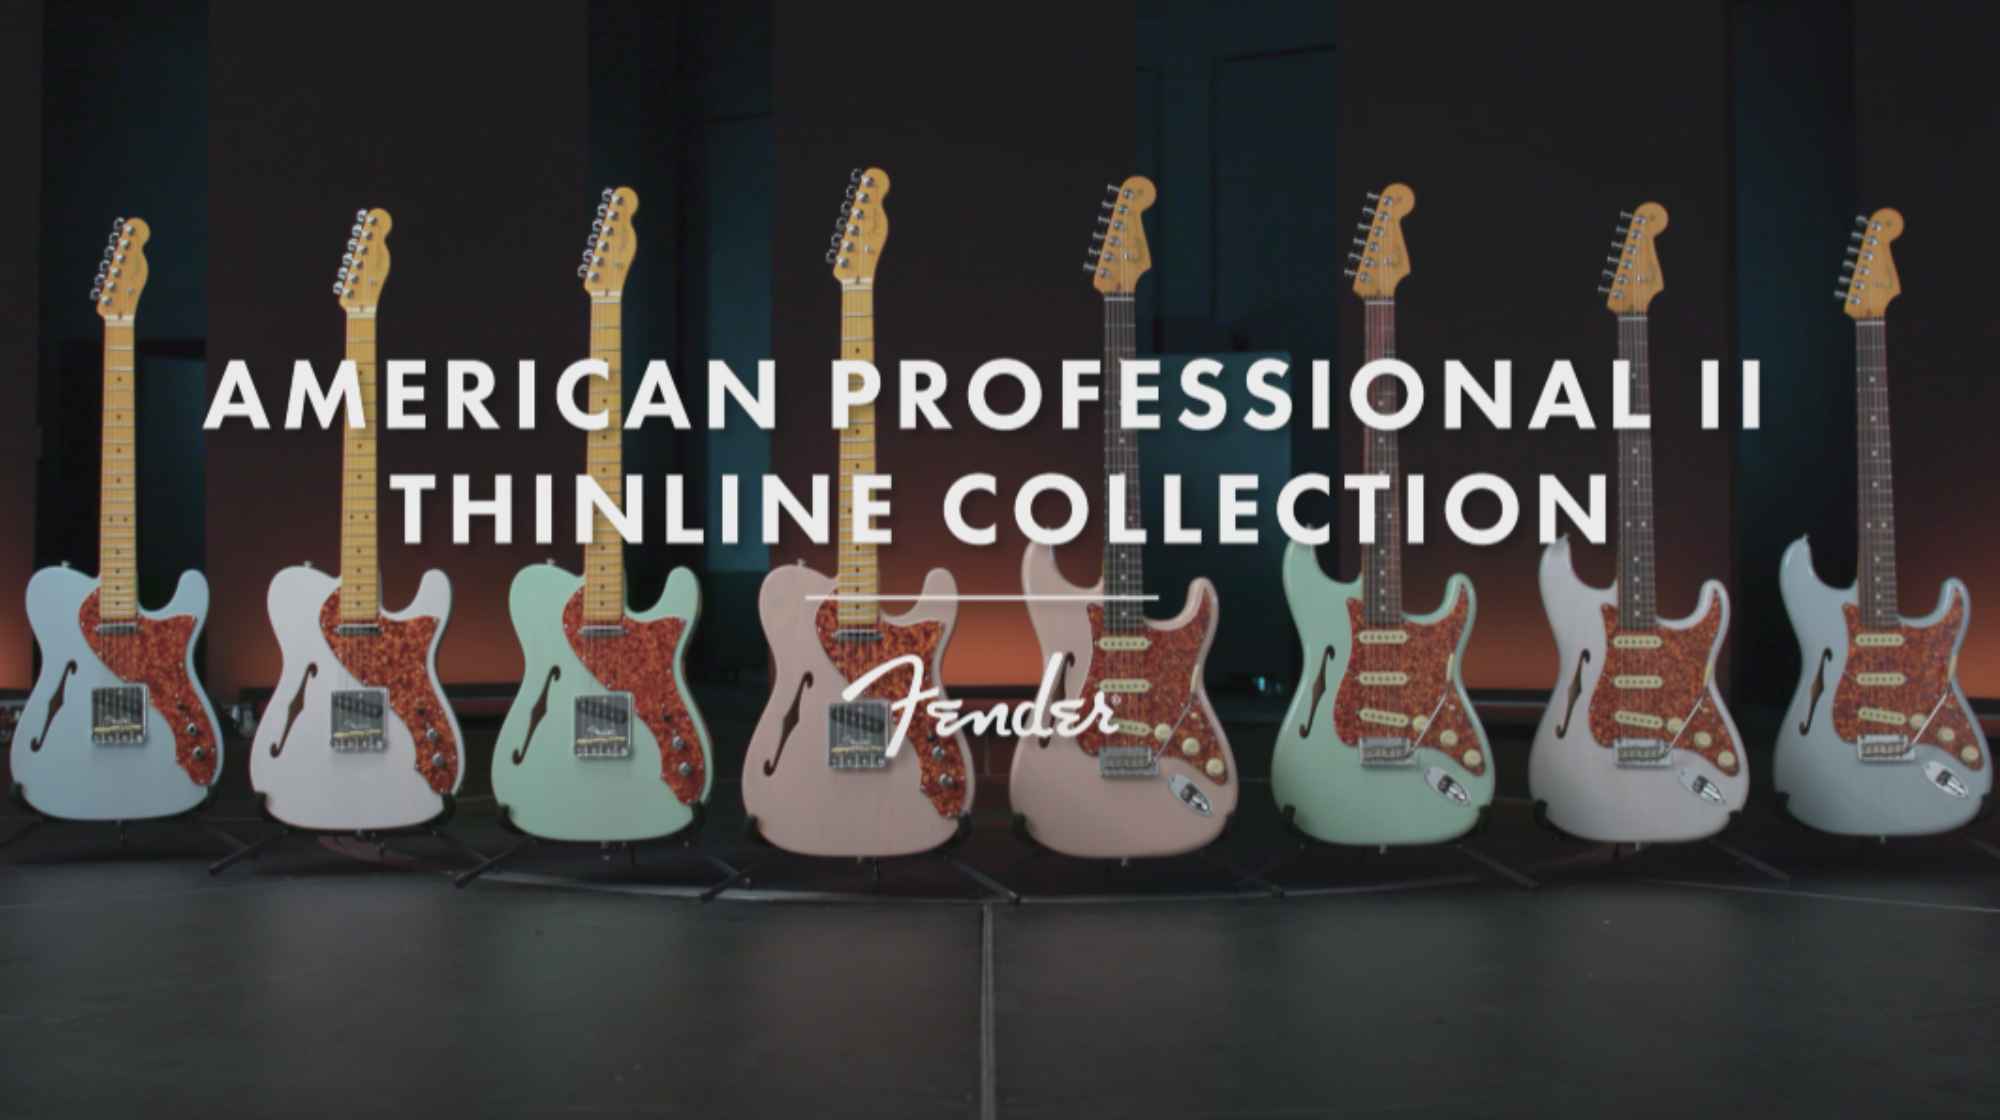 Limited Edition American Professional II Thinline